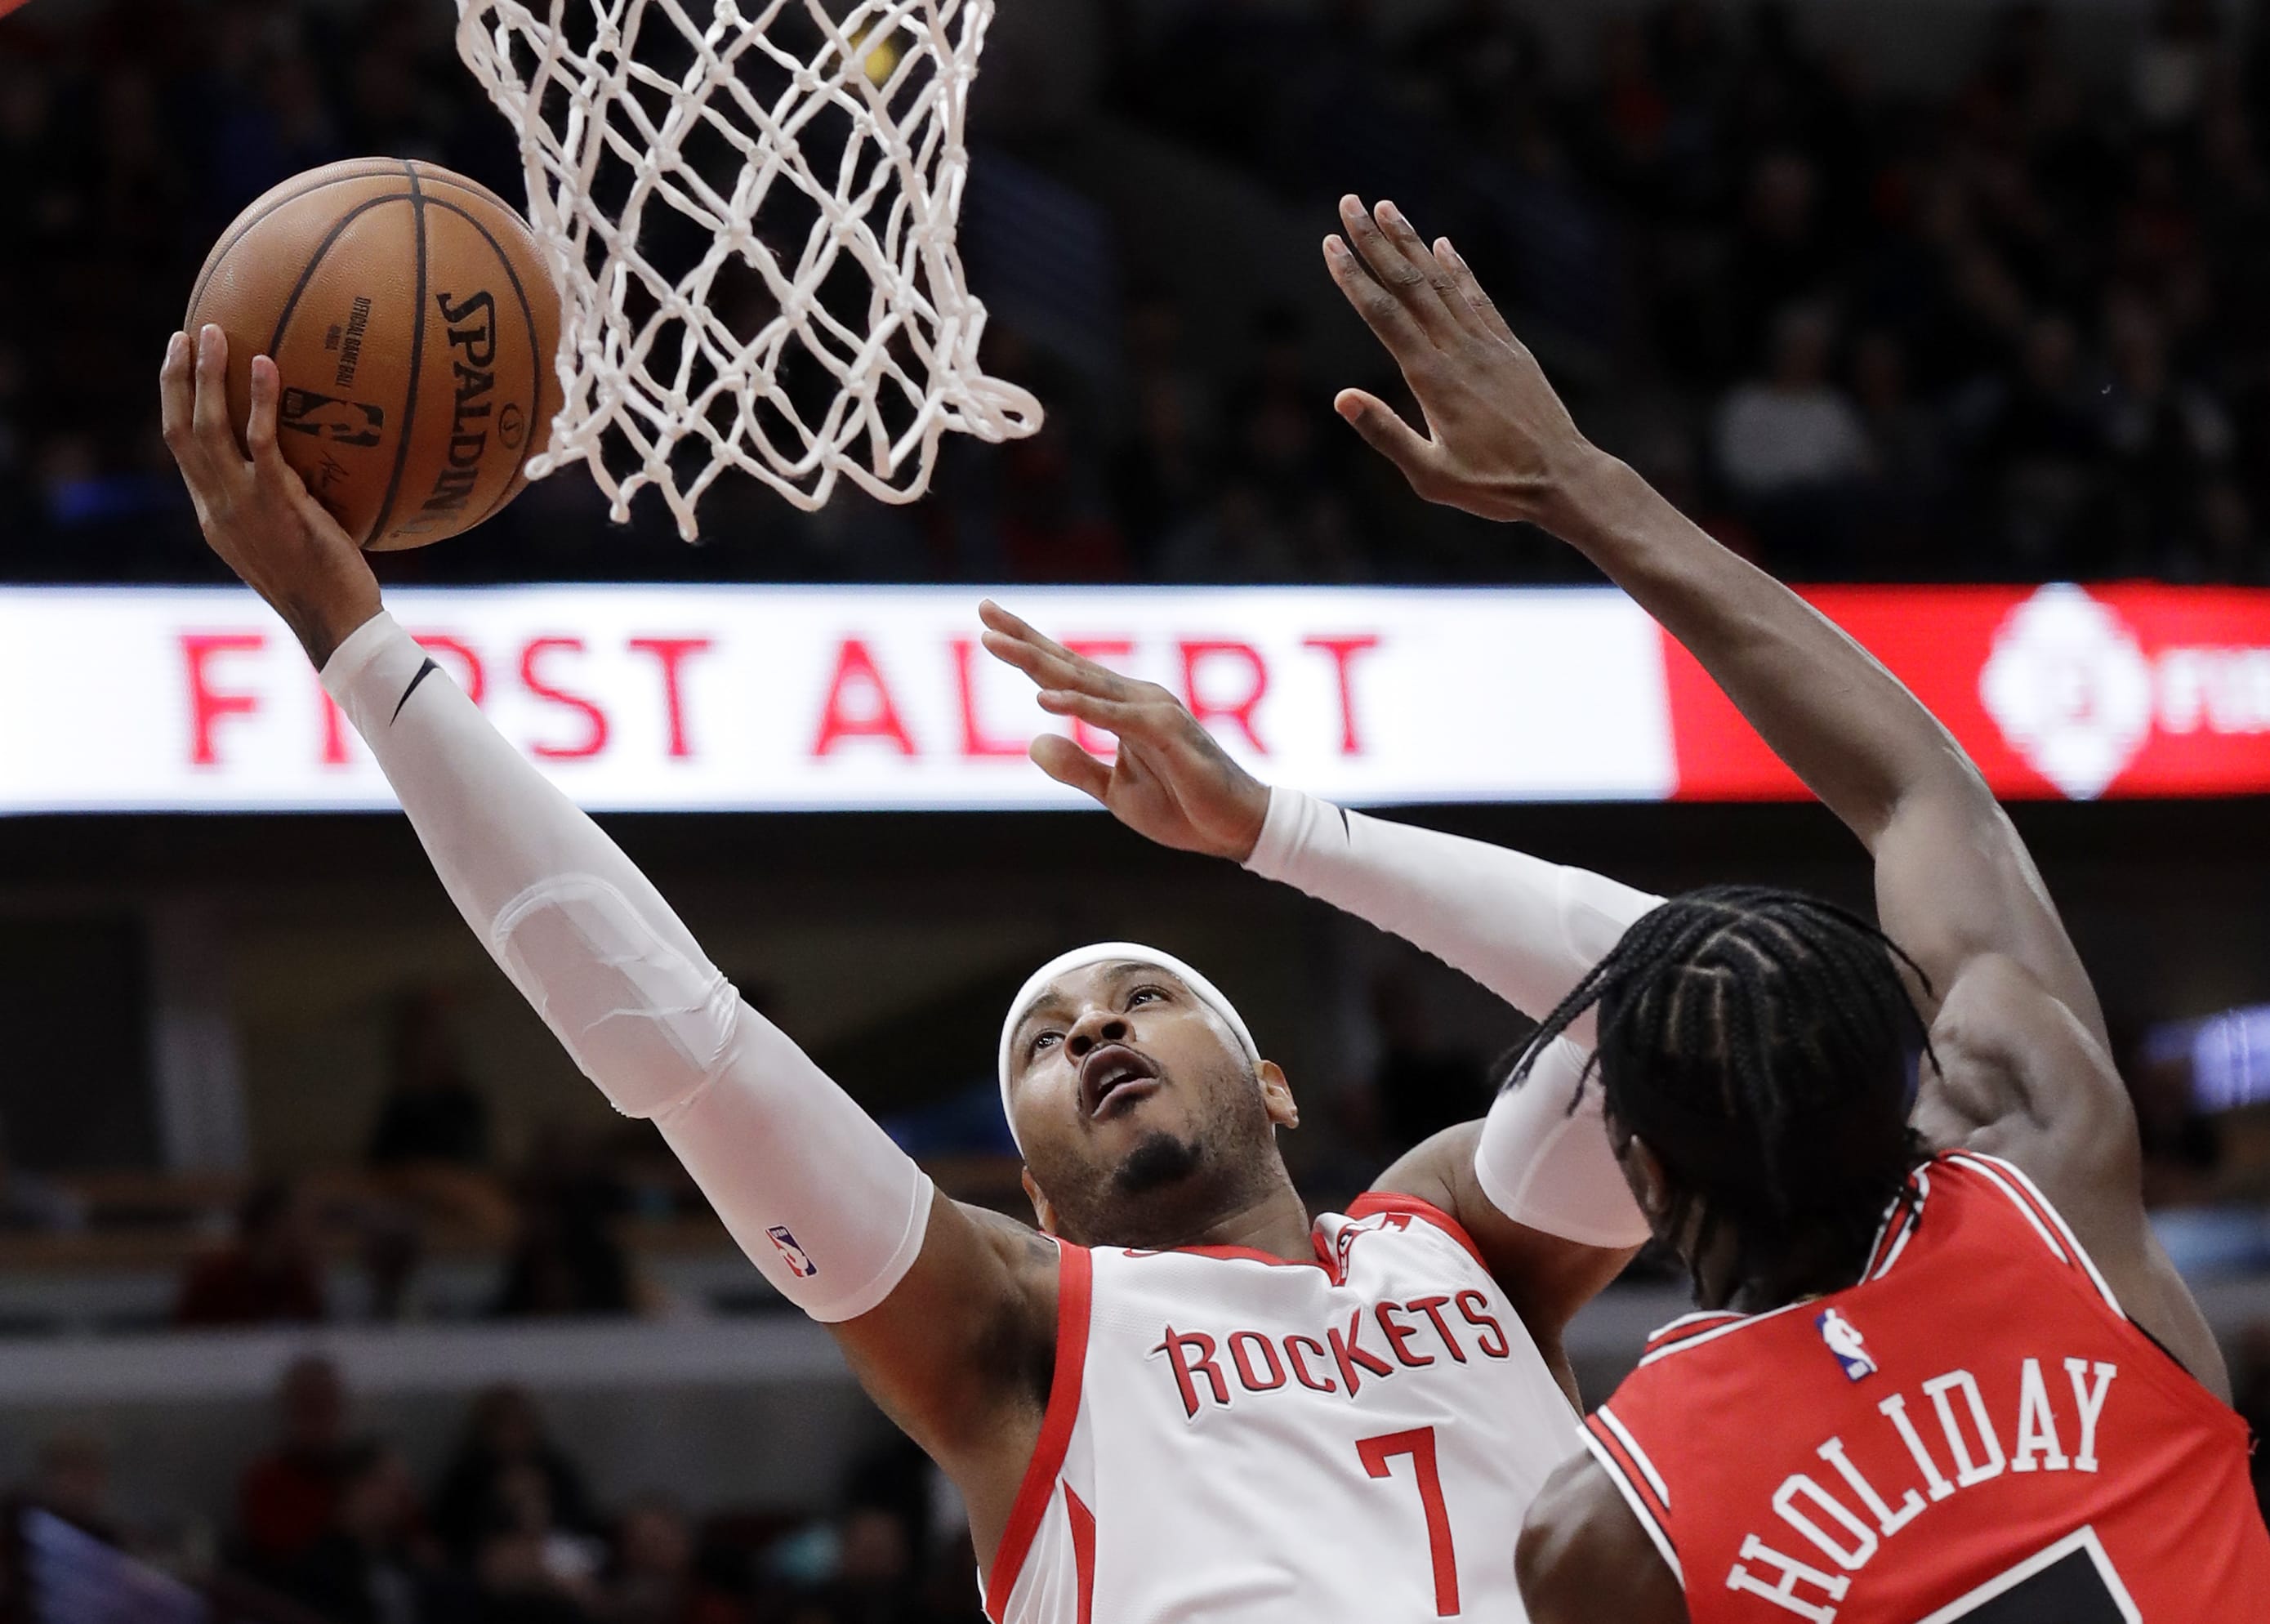 Carmelo Anthony (7) is returning to the NBA with the Portland Trail Blazers. The 10-time All-Star has not played since a short stint with the Rockets ended a little more than a year ago after just 10 games. (AP Photo/Nam Y.